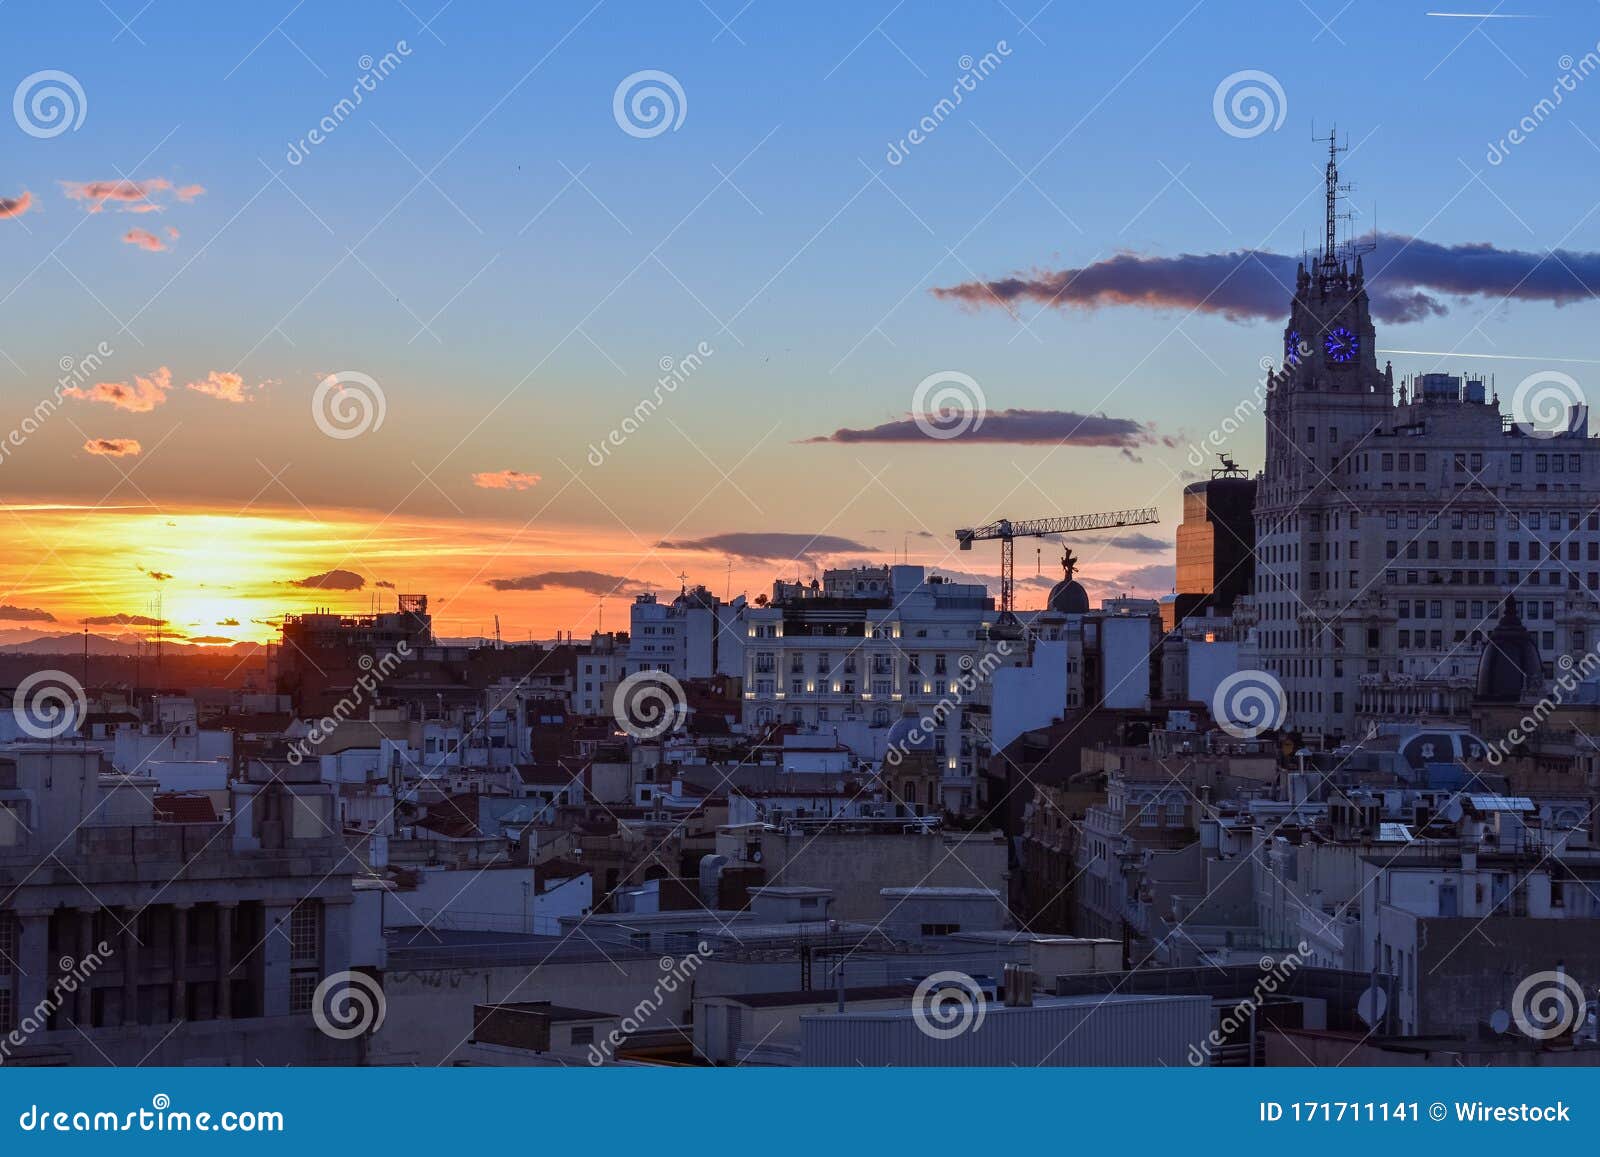 downtown areal view of madrid from the circulo de bellas artes at sunset with colourful sky. madrid,